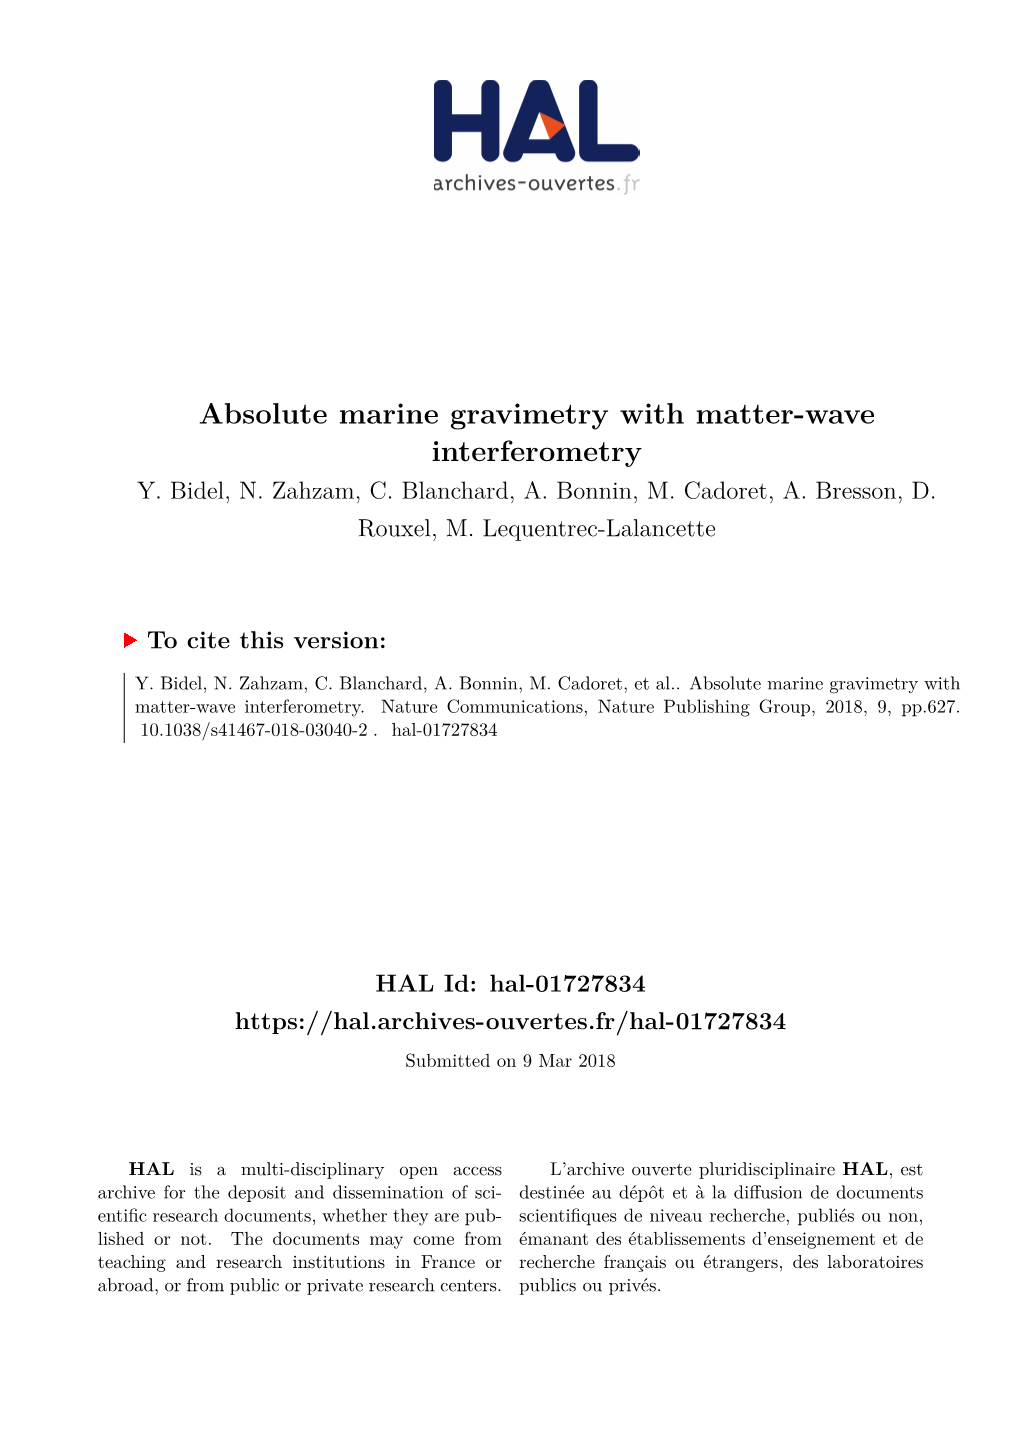 Absolute Marine Gravimetry with Matter-Wave Interferometry Y